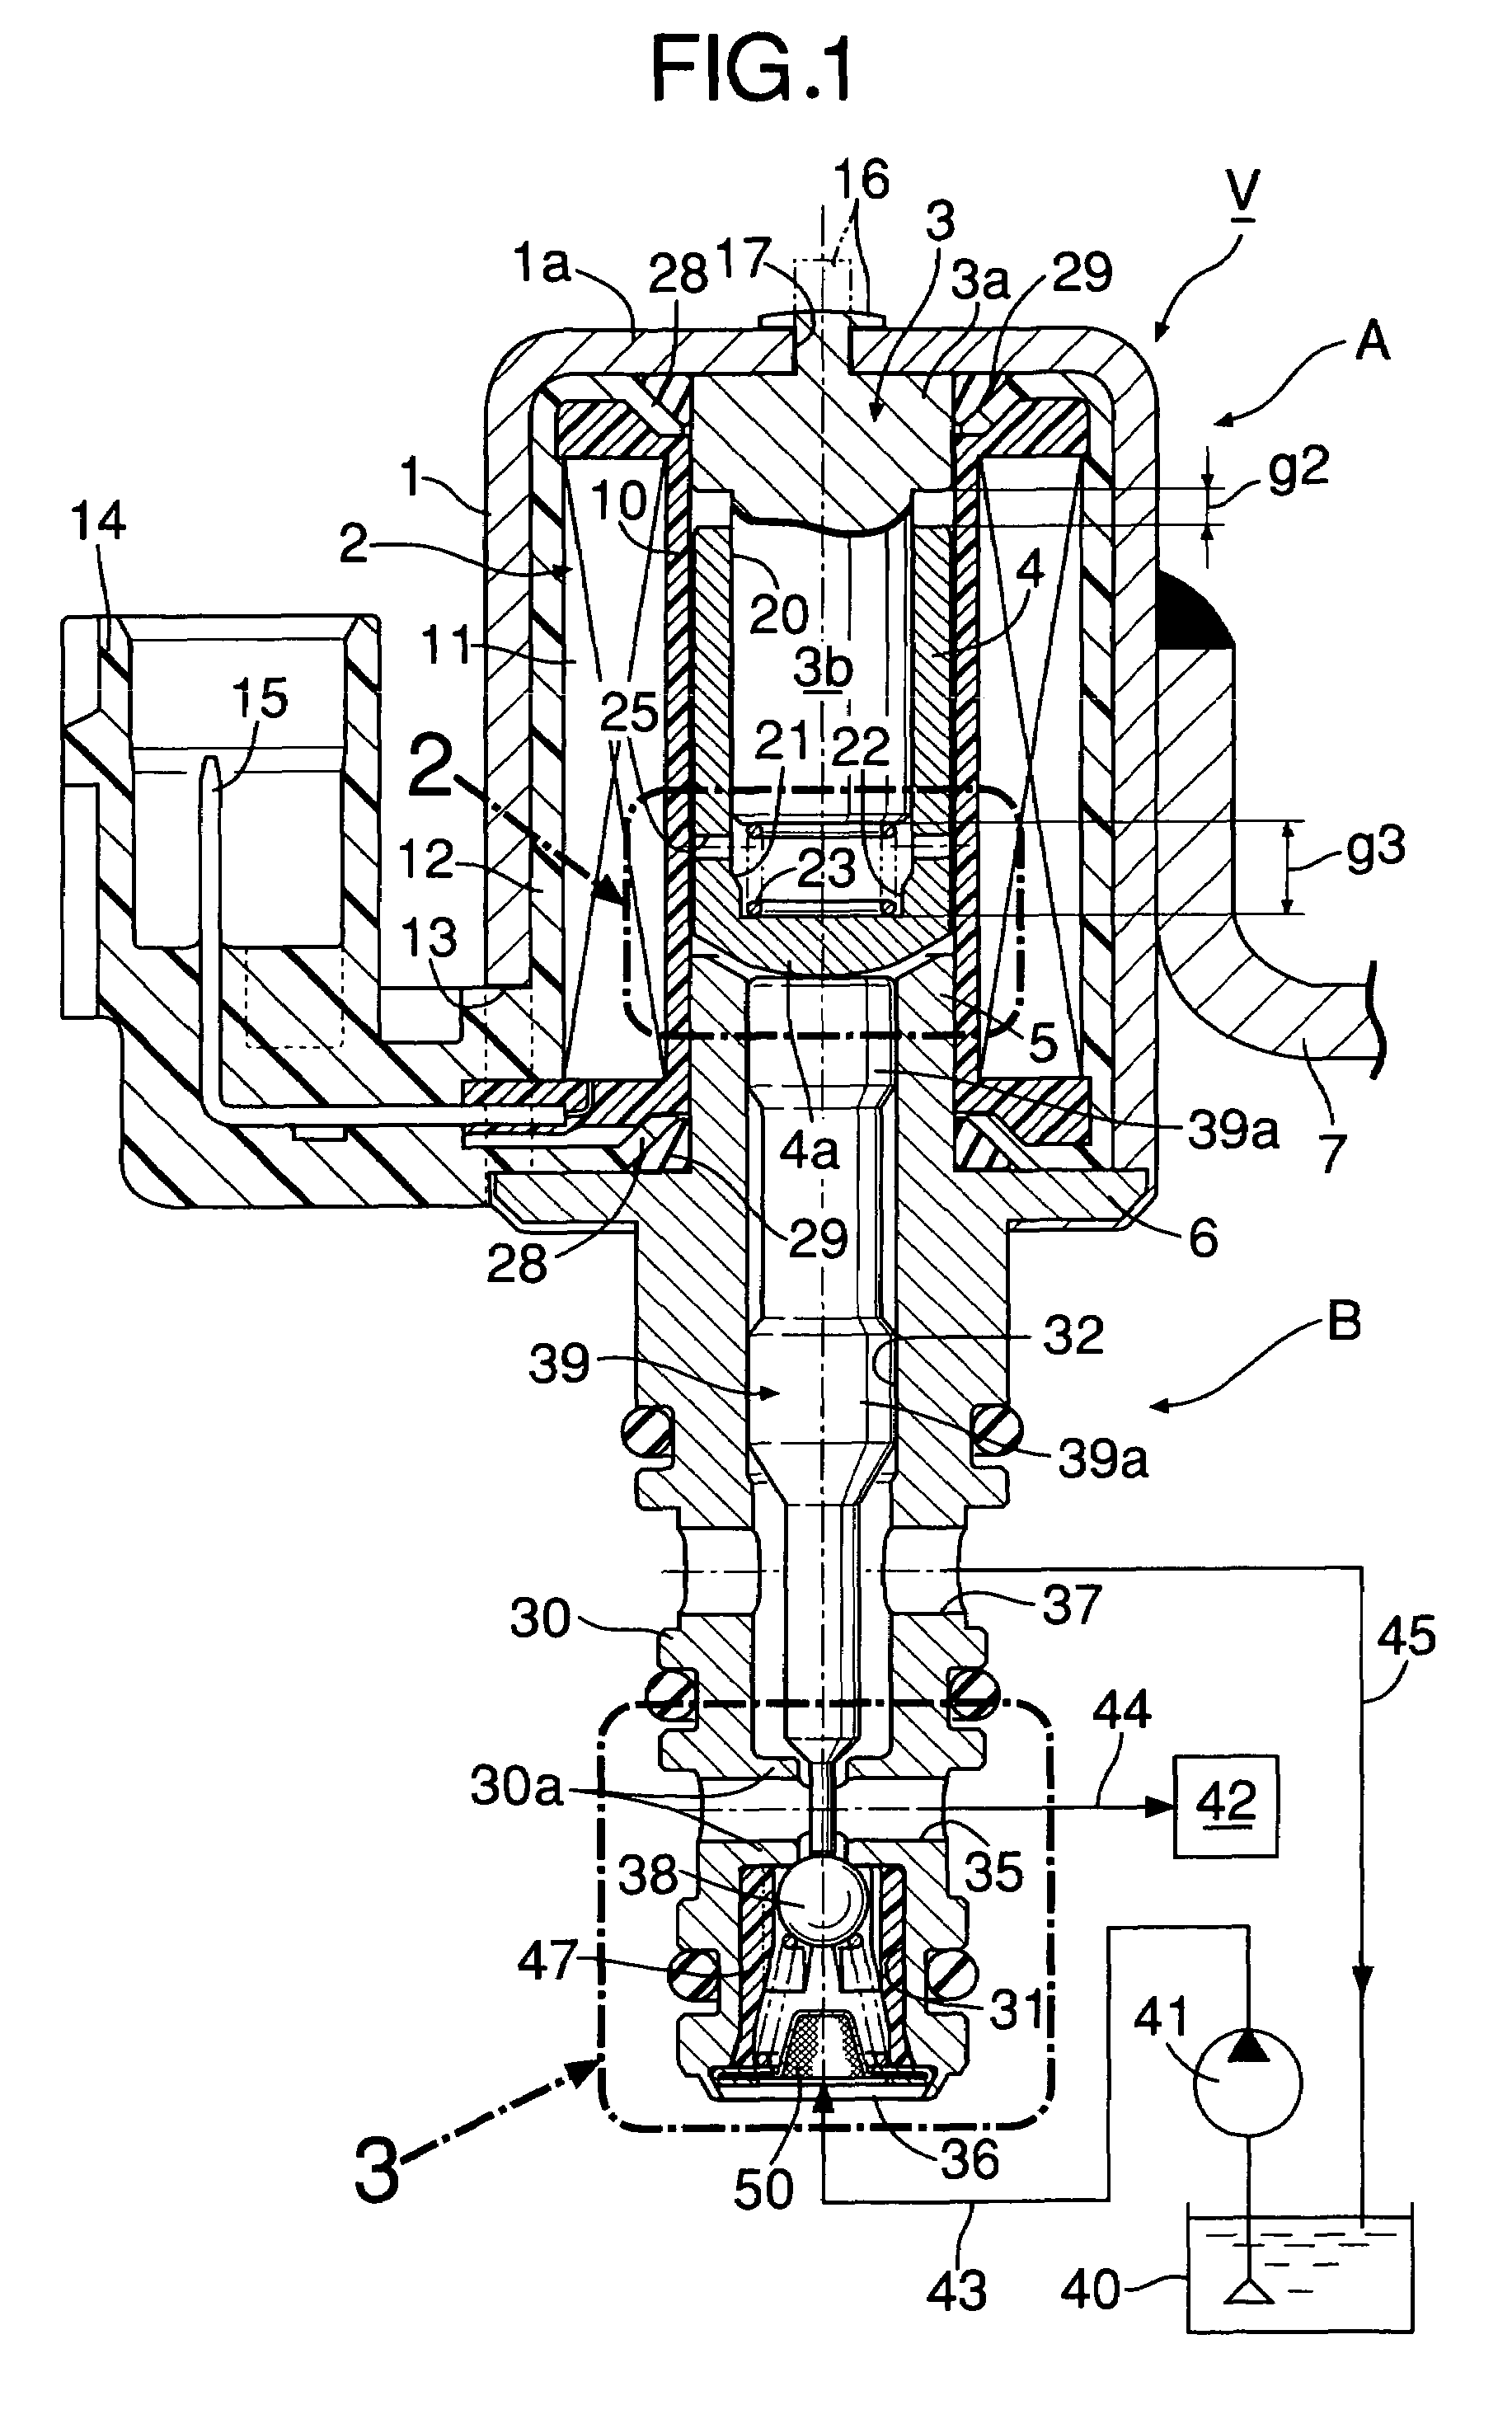 Solenoid valve with cylindrical valve guide for the spherical valve element at the pressure inlet